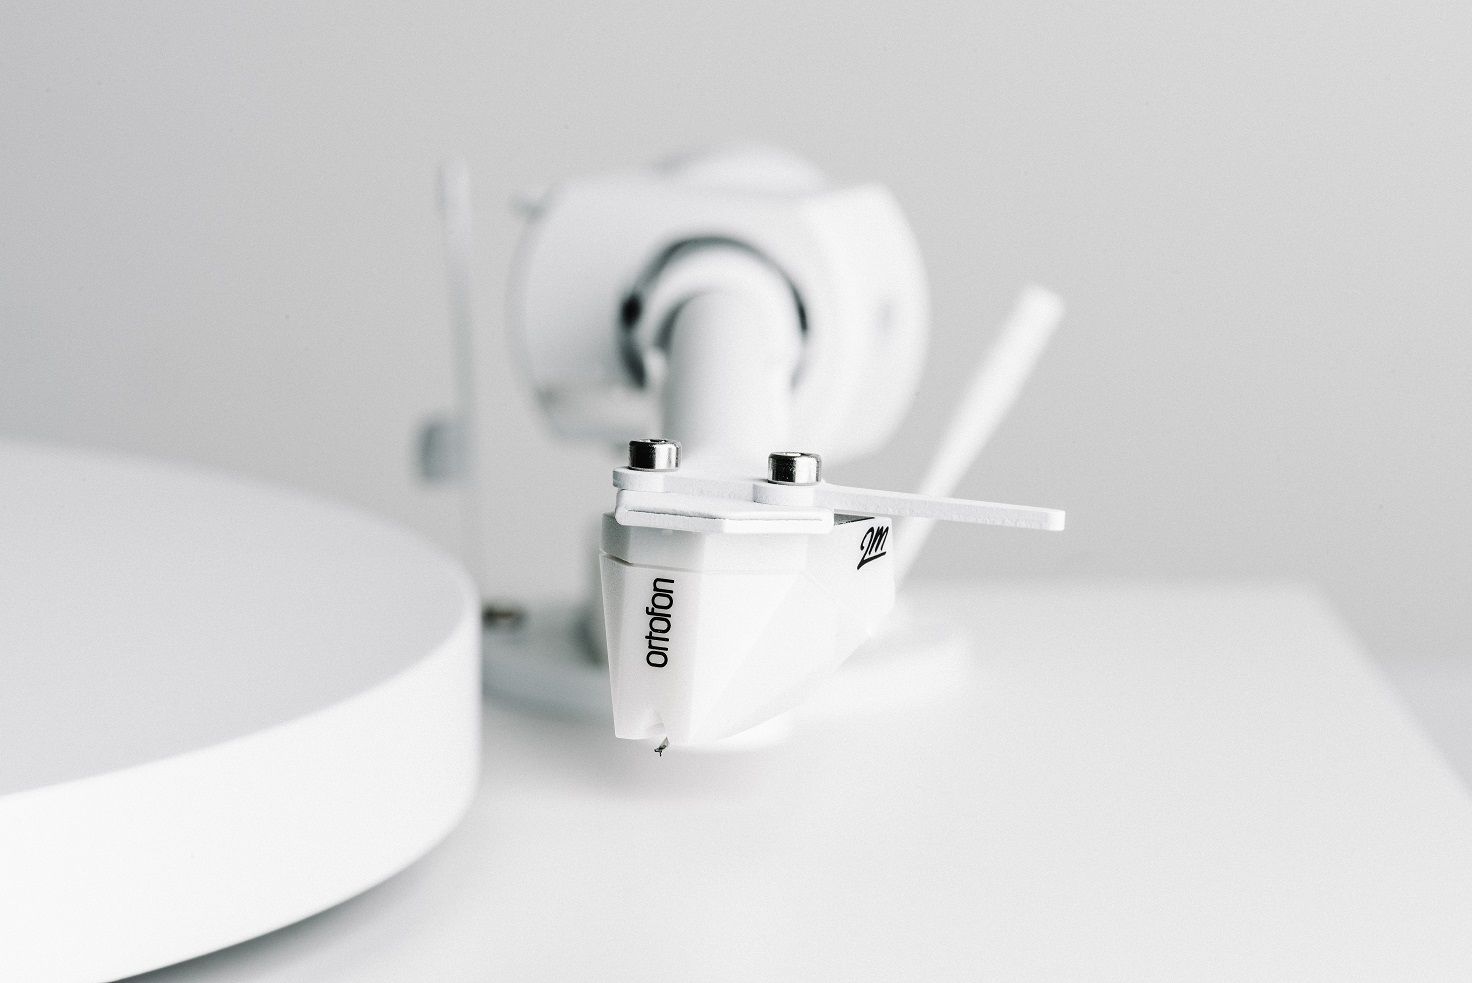 Pro-ject Debut PRO White Edition (2M White) по цене 109 606.57 ₽